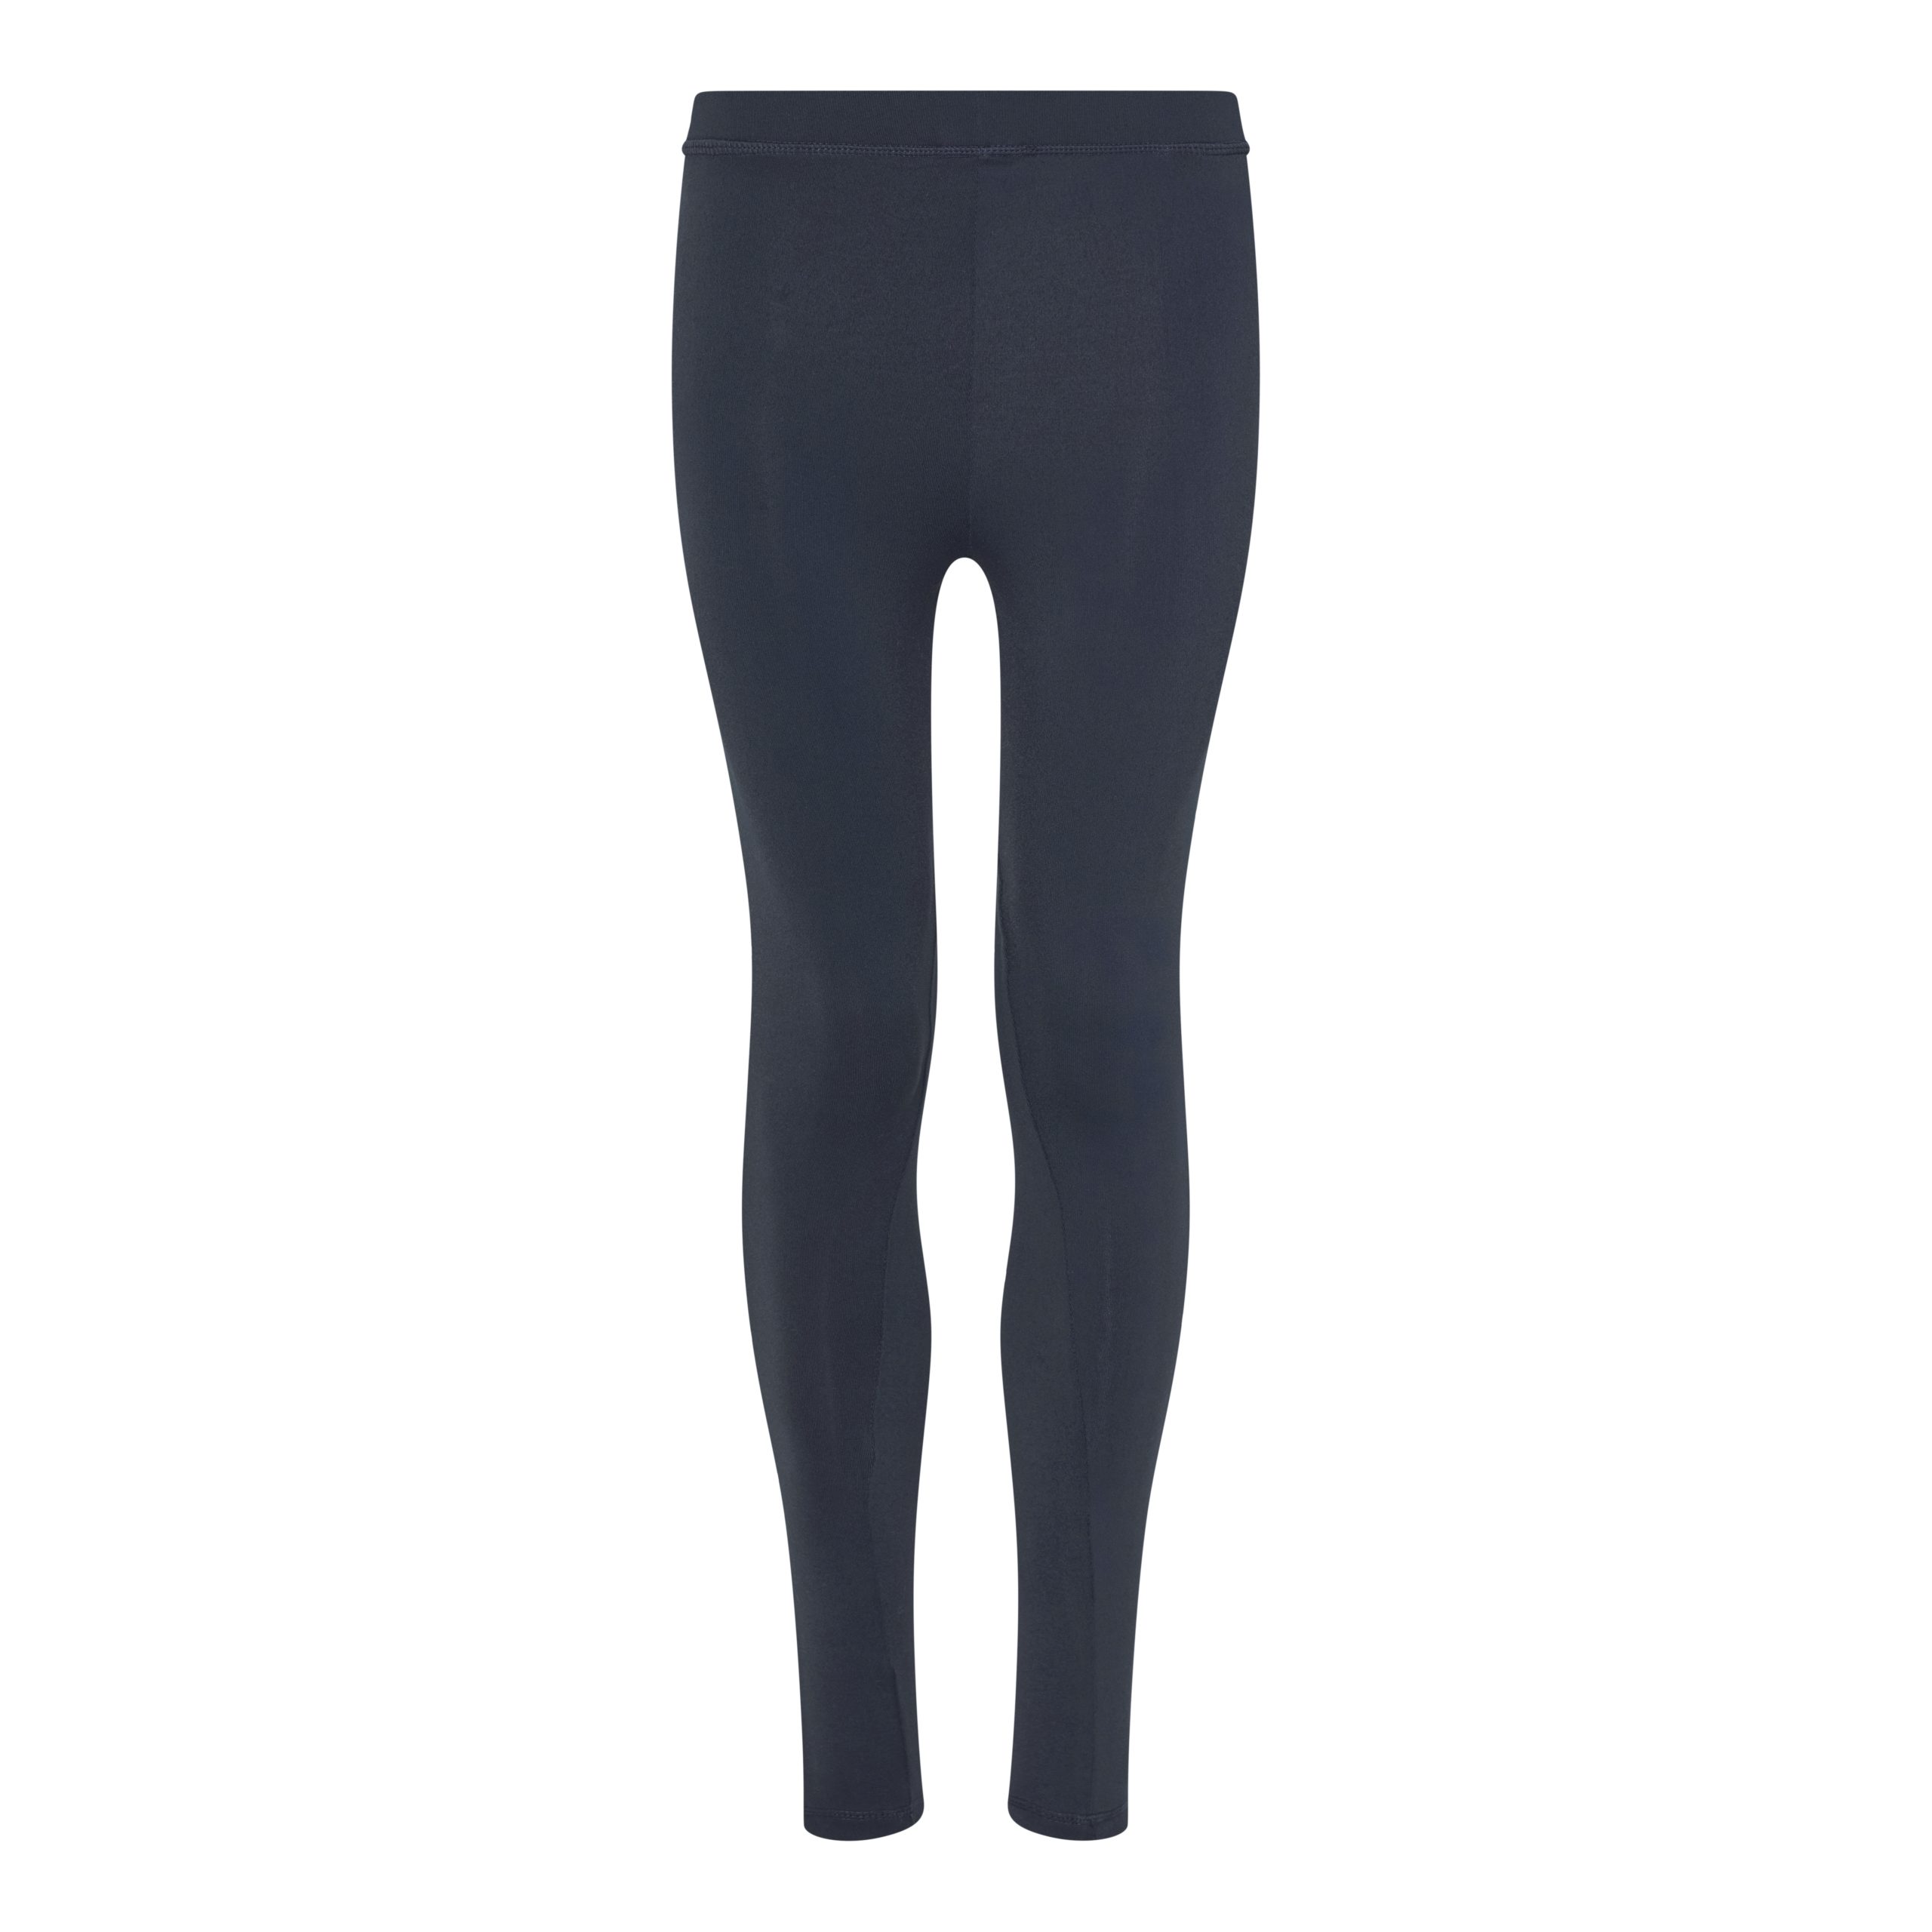 JC087 Girlie cool athletic pant – GDB Manufacturing